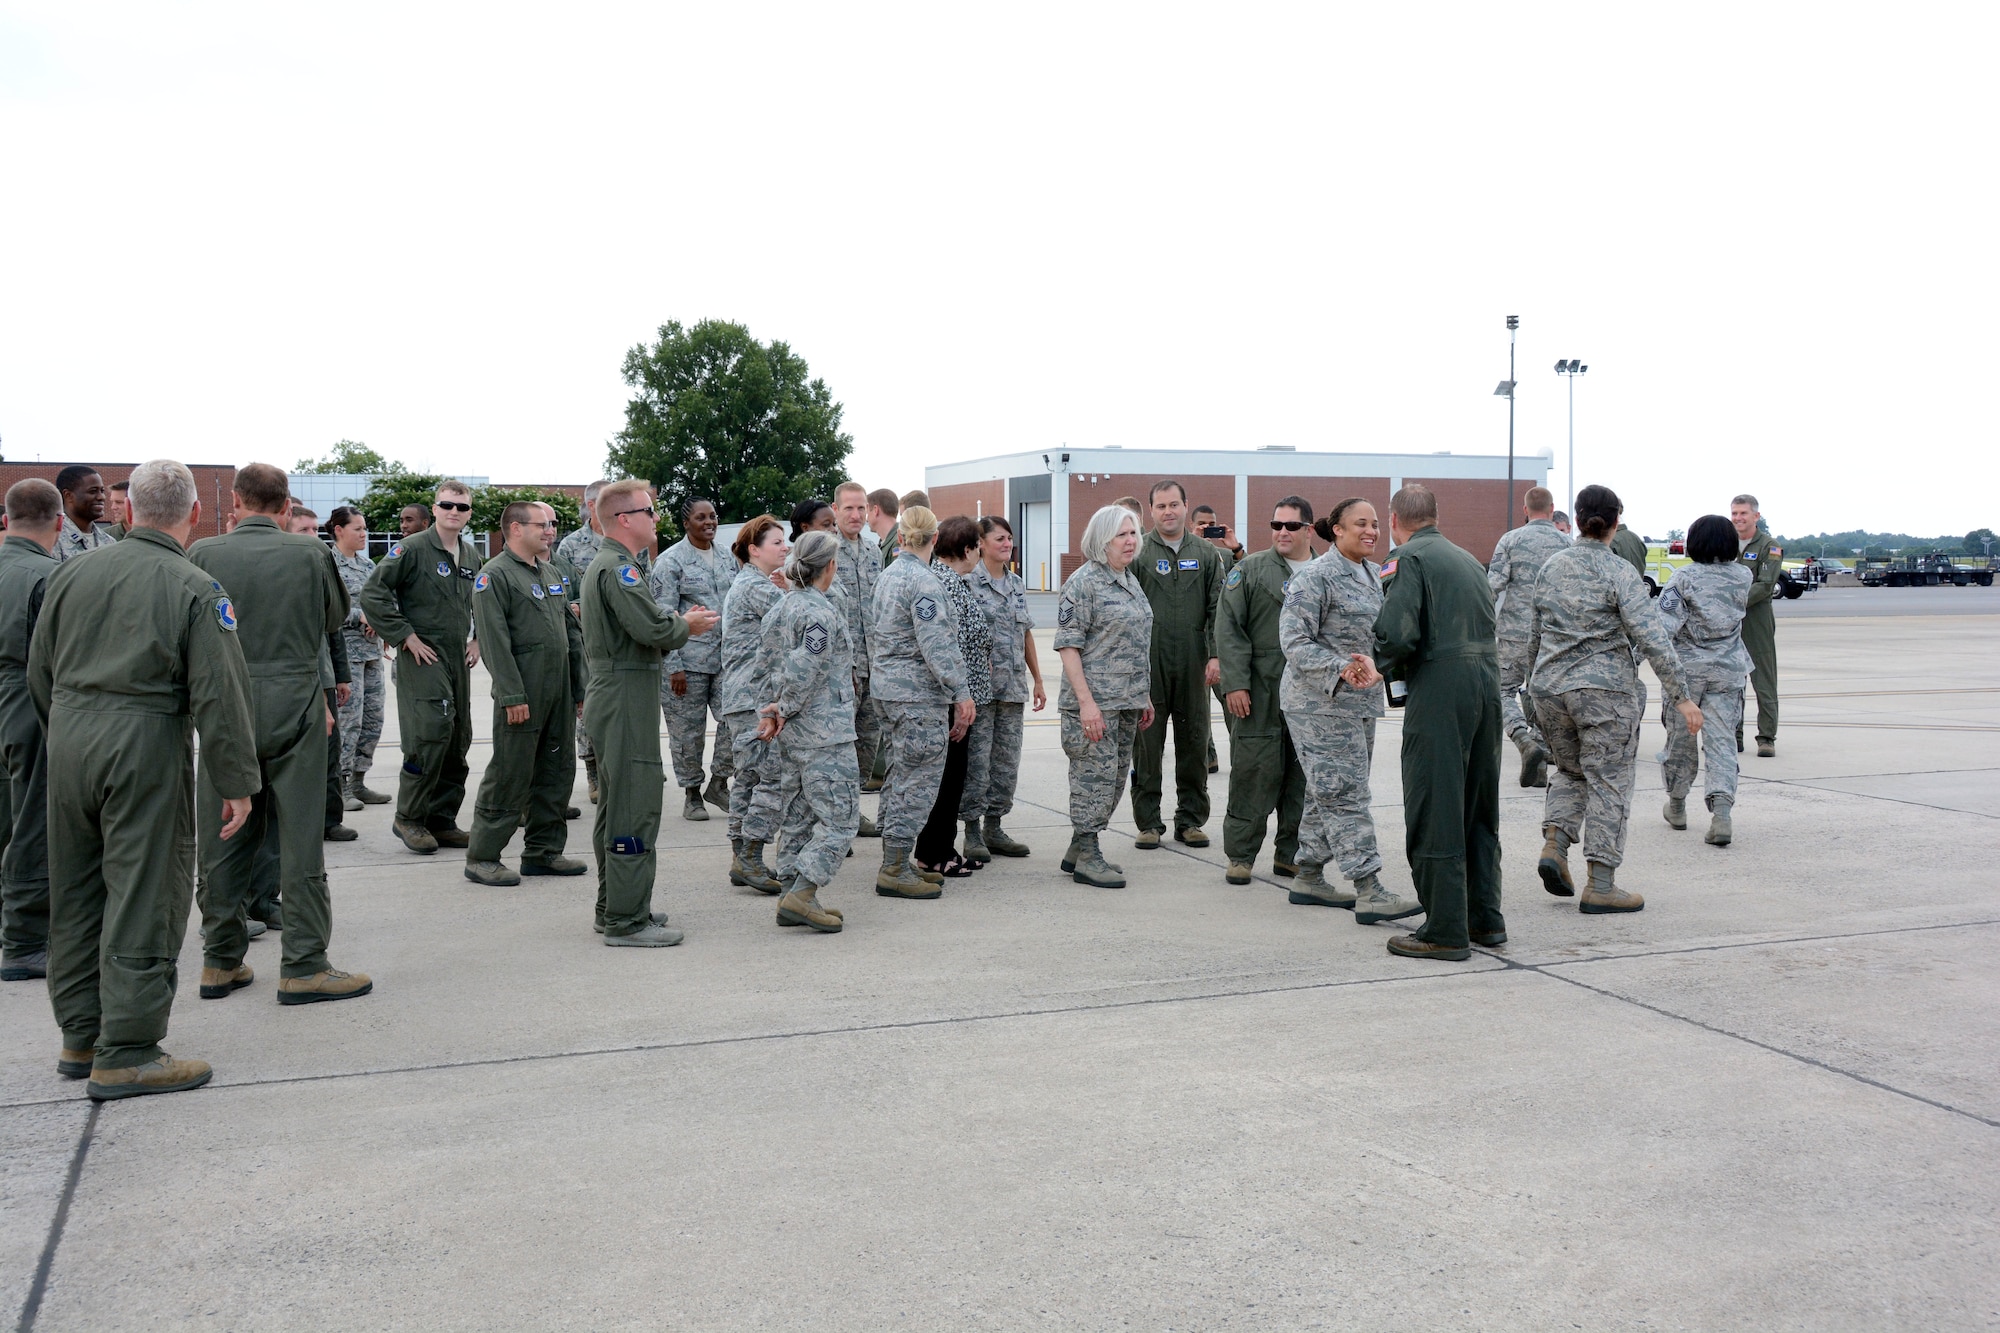 U.S. Air Force Col. Charles D. Davis III, is greeted and congratulated by members of the 145th Airlift Wing following his final flight onboard a 145th Airlift Wing, C-130 Hercules aircraft at the North Carolina Air National Guard Base, Charlotte Douglas International Airport, July 28, 2015. In a tradition nearly as old as military aviation itself, the “fini” flight symbolizes the end of Davis’ 38 years of honorable military service. (U.S. Air National Guard photo by Master Sgt. Patricia F. Moran, 145th Public Affairs/Released)